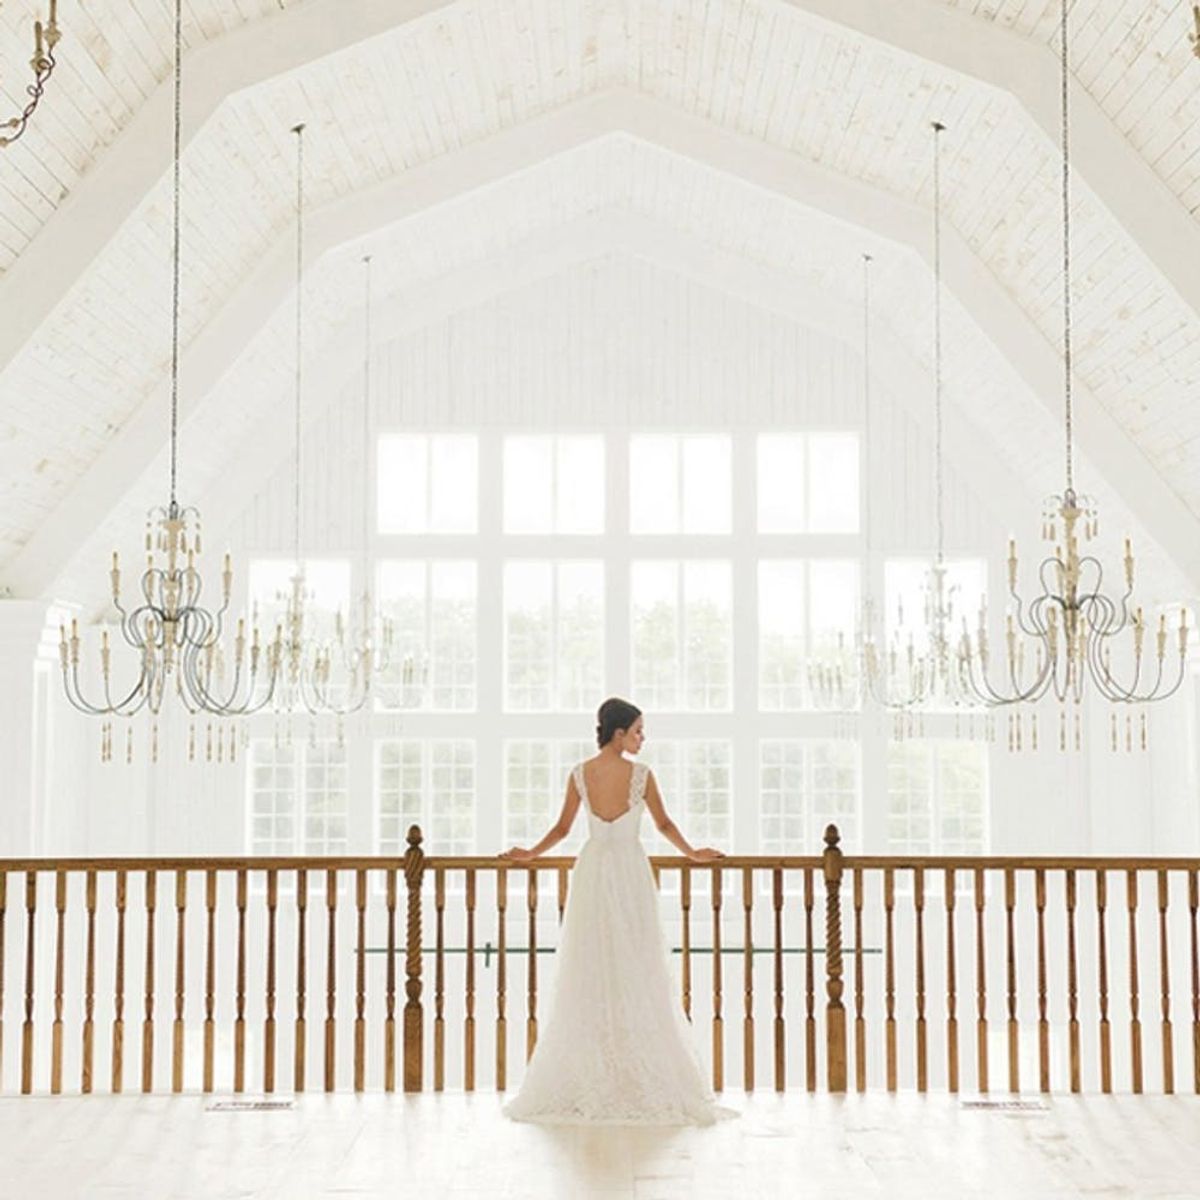 10 Breathtaking Wedding Venues That Will Make Your Jaw Drop